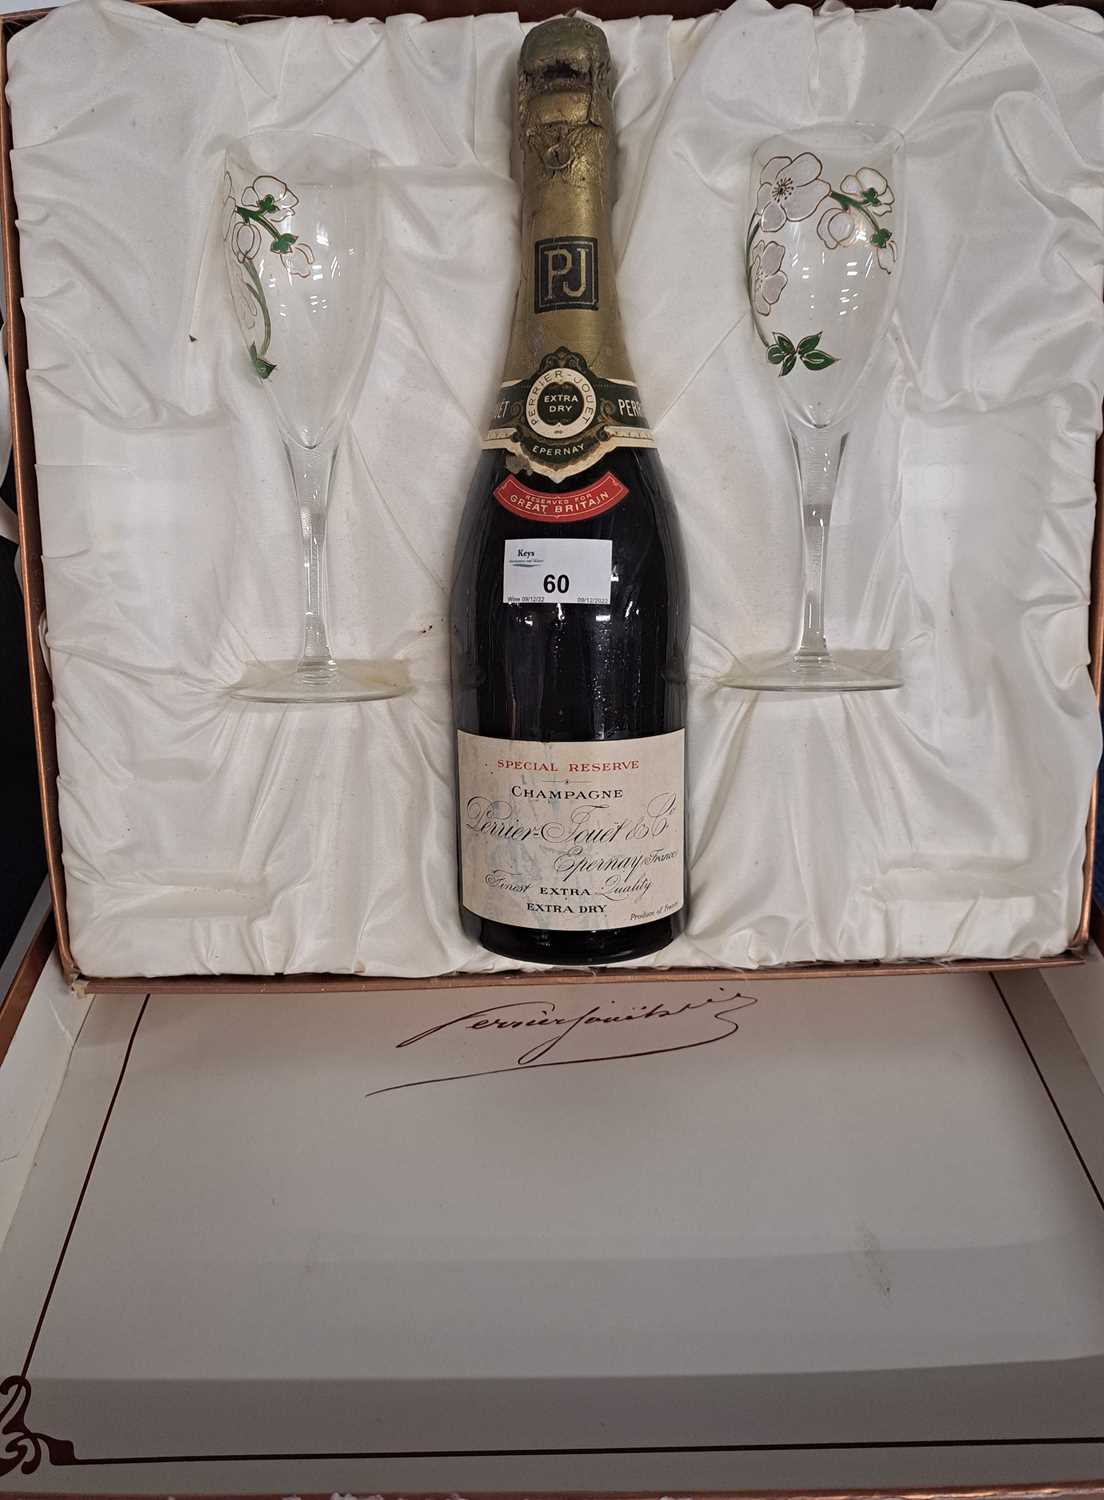 1 Bt NV Perrier Jouet Champagne with 2 champagne flutes in original gift boxQty: 1